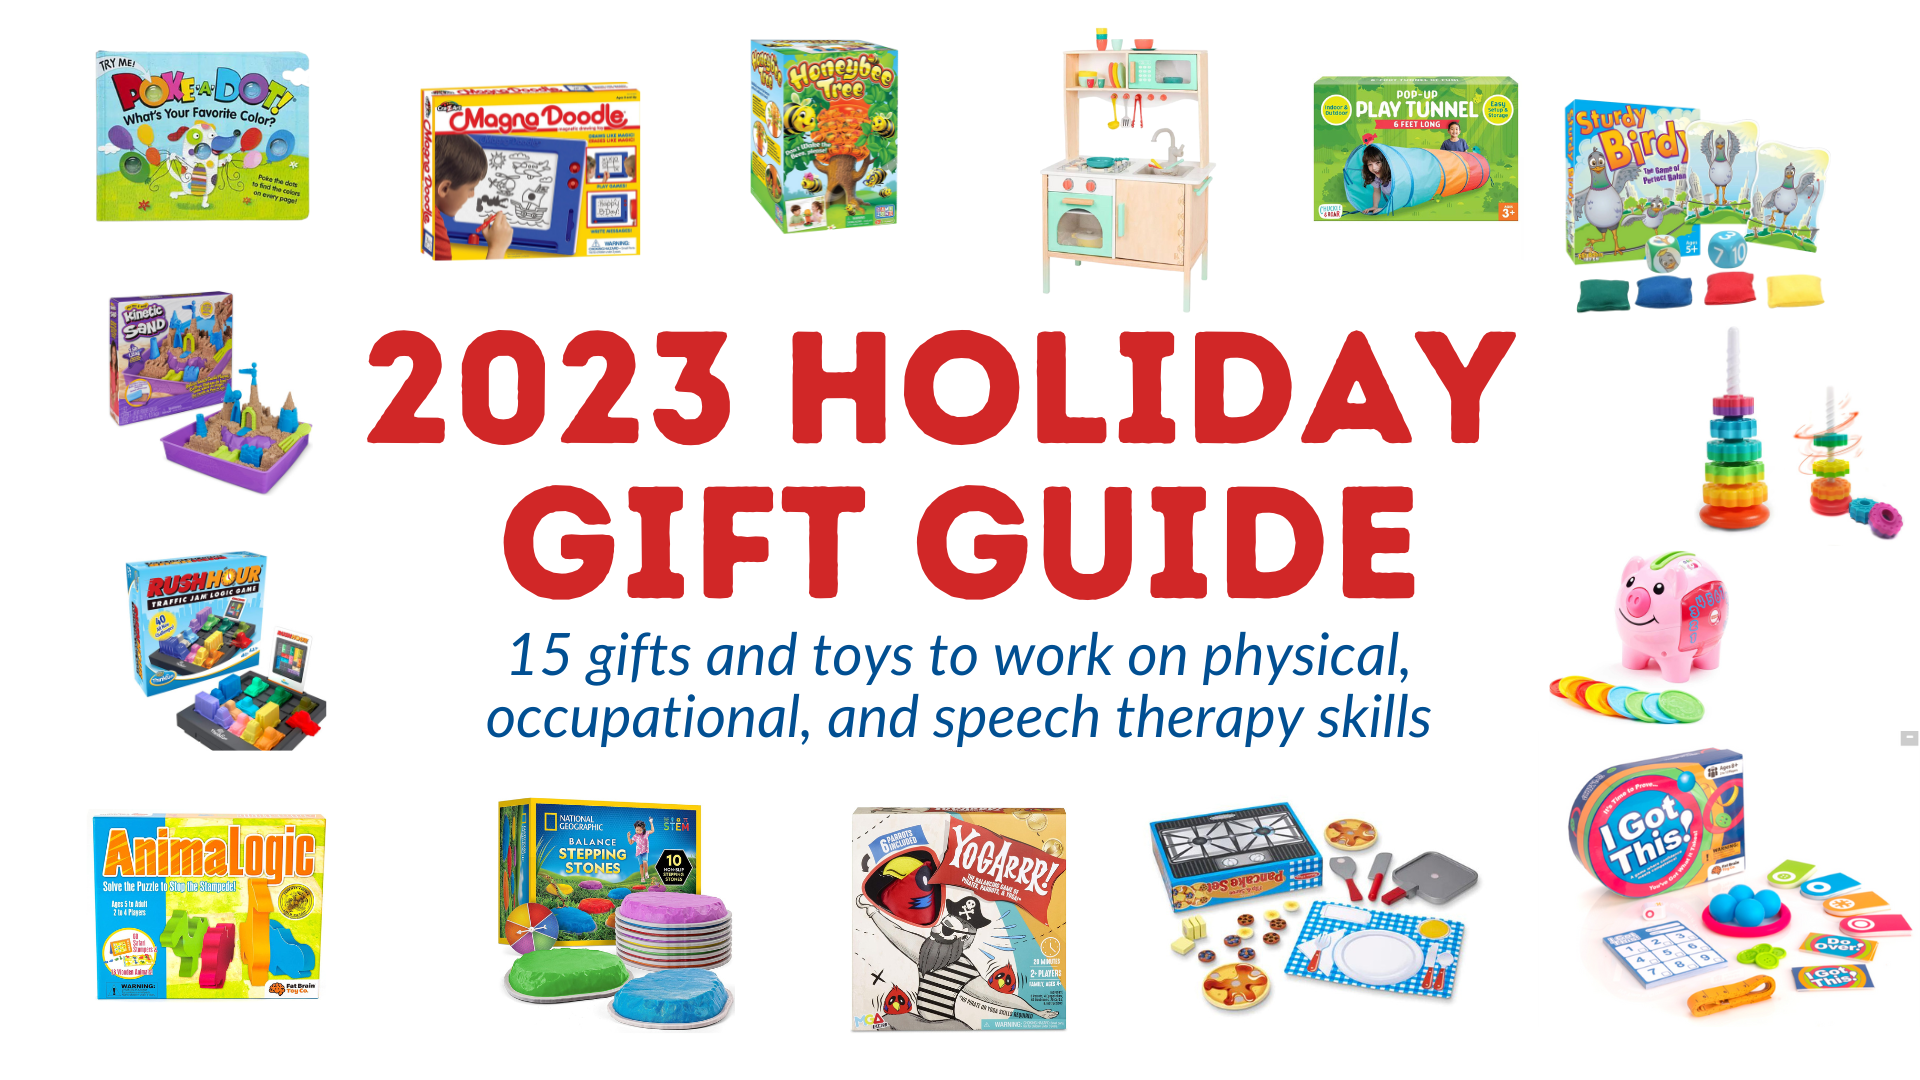 Holiday Gift Guide 2023: Best Travel Games for Children and Adults